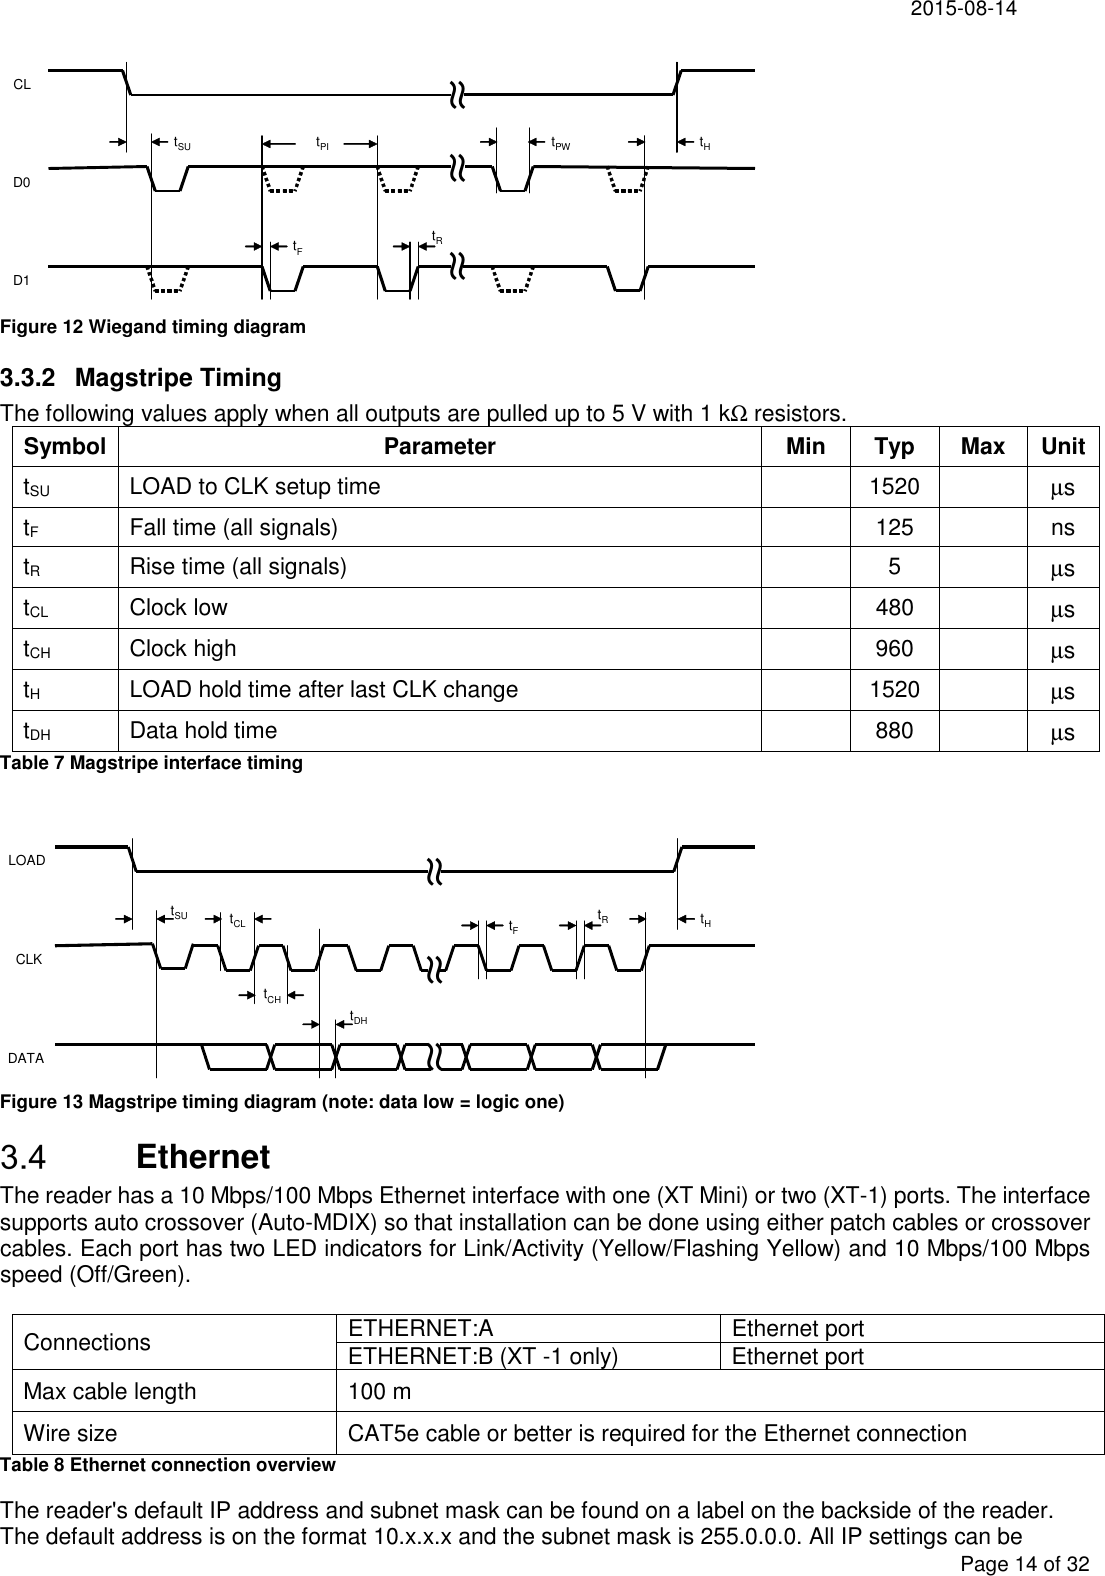 XT-1/XT Mini Manual     13-111 05, 2015-08-14  Page 14 of 32  tSUtPItPWtHtRtFCLD0D1≈ ≈ ≈ Figure 12 Wiegand timing diagram 3.3.2  Magstripe Timing The following values apply when all outputs are pulled up to 5 V with 1 kΩ resistors. Symbol Parameter Min Typ Max Unit tSU  LOAD to CLK setup time    1520    µs tF  Fall time (all signals)    125    ns tR  Rise time (all signals)    5    µs tCL  Clock low    480    µs tCH  Clock high    960    µs tH  LOAD hold time after last CLK change    1520    µs tDH  Data hold time    880    µs Table 7 Magstripe interface timing  ≈≈tSULOADCLKDATA≈tCLtCHtDHtHtRtF Figure 13 Magstripe timing diagram (note: data low = logic one)  Ethernet The reader has a 10 Mbps/100 Mbps Ethernet interface with one (XT Mini) or two (XT-1) ports. The interface supports auto crossover (Auto-MDIX) so that installation can be done using either patch cables or crossover cables. Each port has two LED indicators for Link/Activity (Yellow/Flashing Yellow) and 10 Mbps/100 Mbps speed (Off/Green).  Connections  ETHERNET:A  Ethernet port ETHERNET:B (XT -1 only)  Ethernet port Max cable length  100 m Wire size  CAT5e cable or better is required for the Ethernet connection Table 8 Ethernet connection overview The reader&apos;s default IP address and subnet mask can be found on a label on the backside of the reader. The default address is on the format 10.x.x.x and the subnet mask is 255.0.0.0. All IP settings can be 